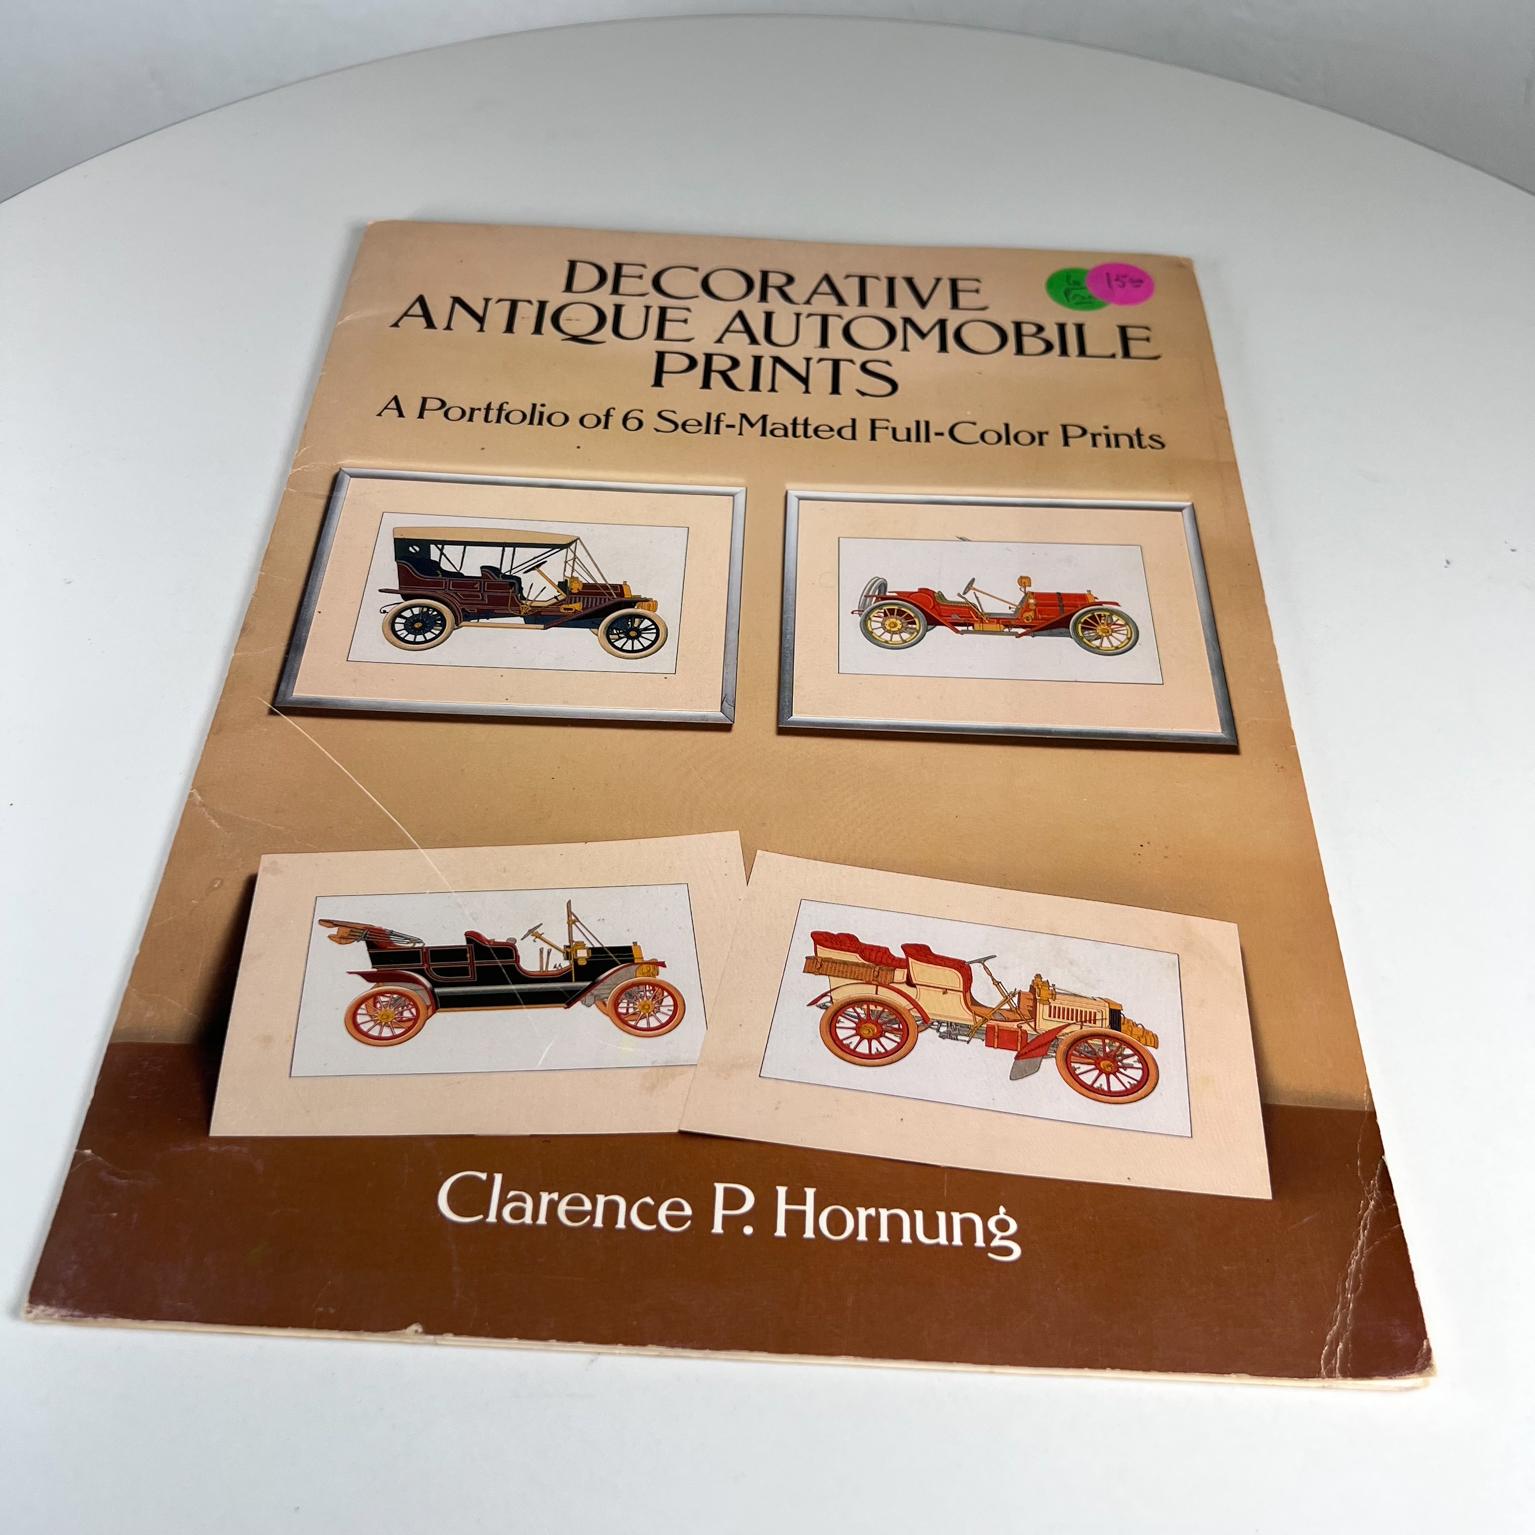 Decorative Antique Automobile Prints, A portfolio of 6 Self-Matted Full-Color Prints, Clarence P. Hornung
1991 by Dover Publications INC New York
Printed in Canada
Handsome collection includes meticulously rendered prints of 6 classic cars: